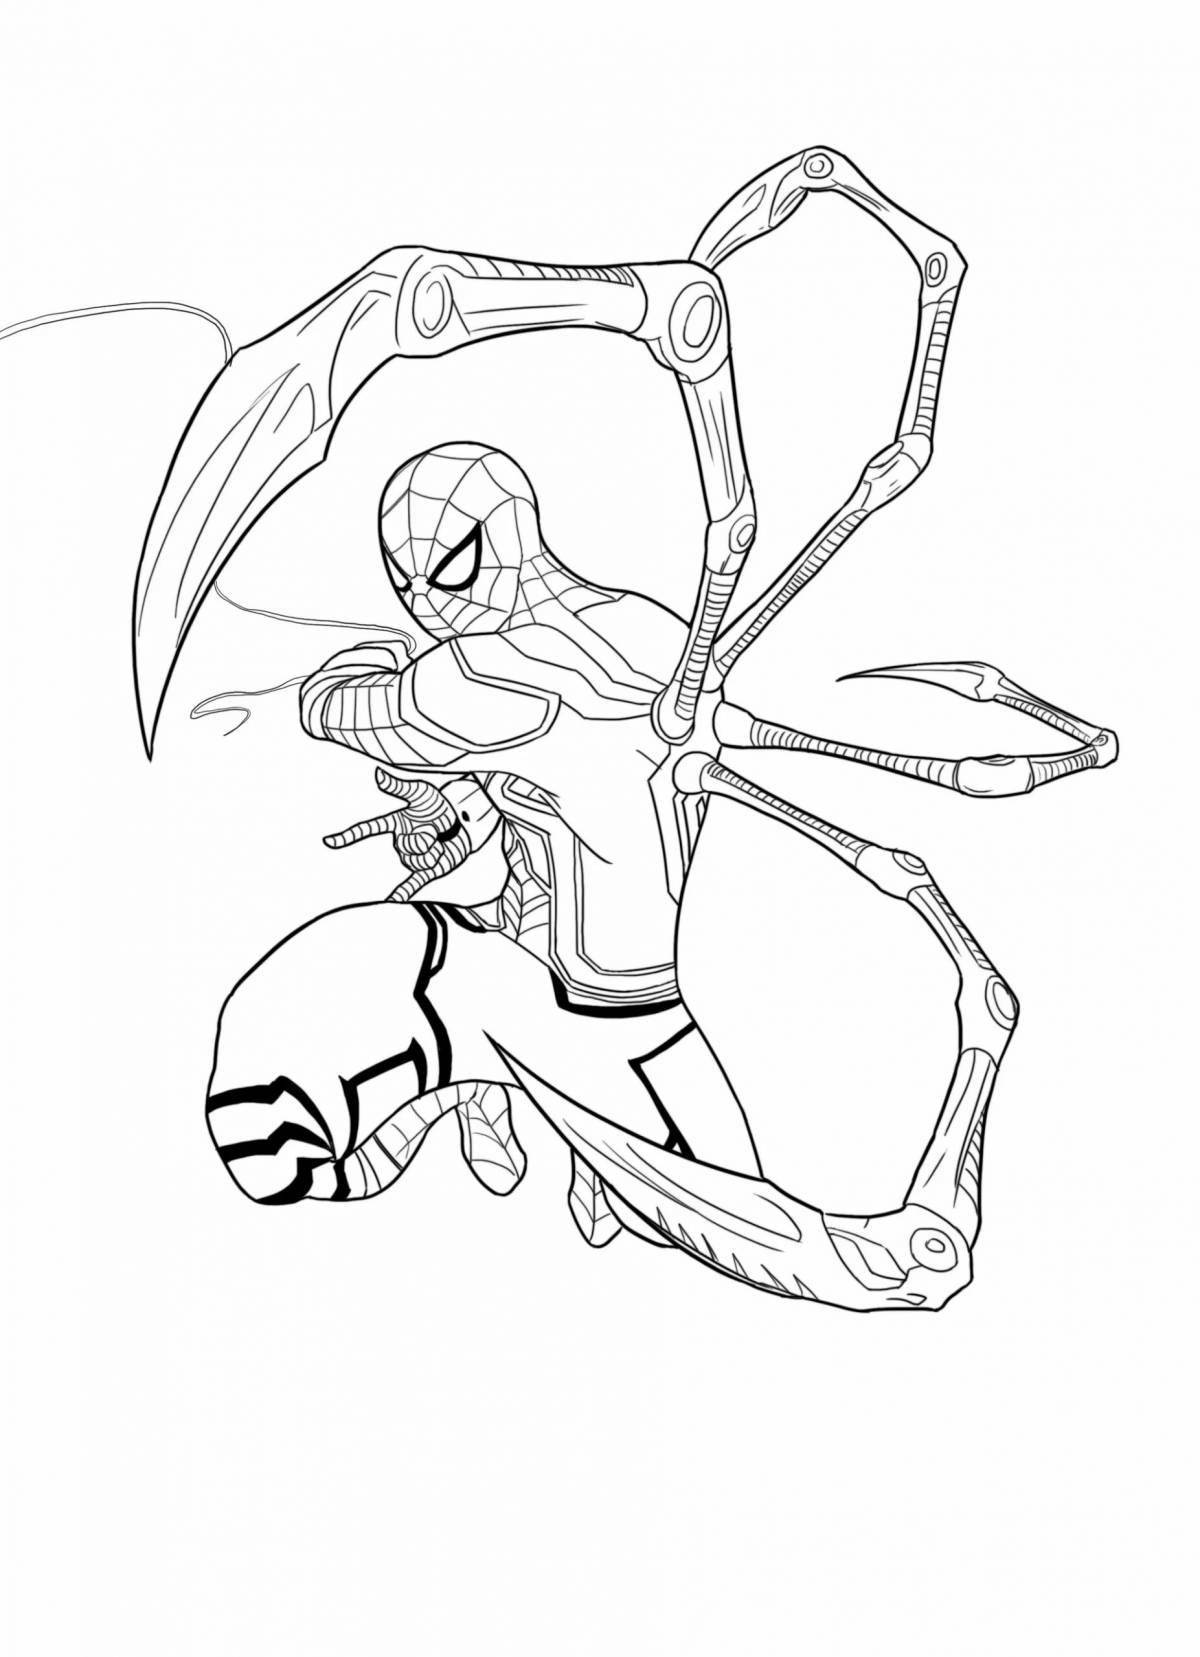 Magic spiderman and iron man coloring pages for kids